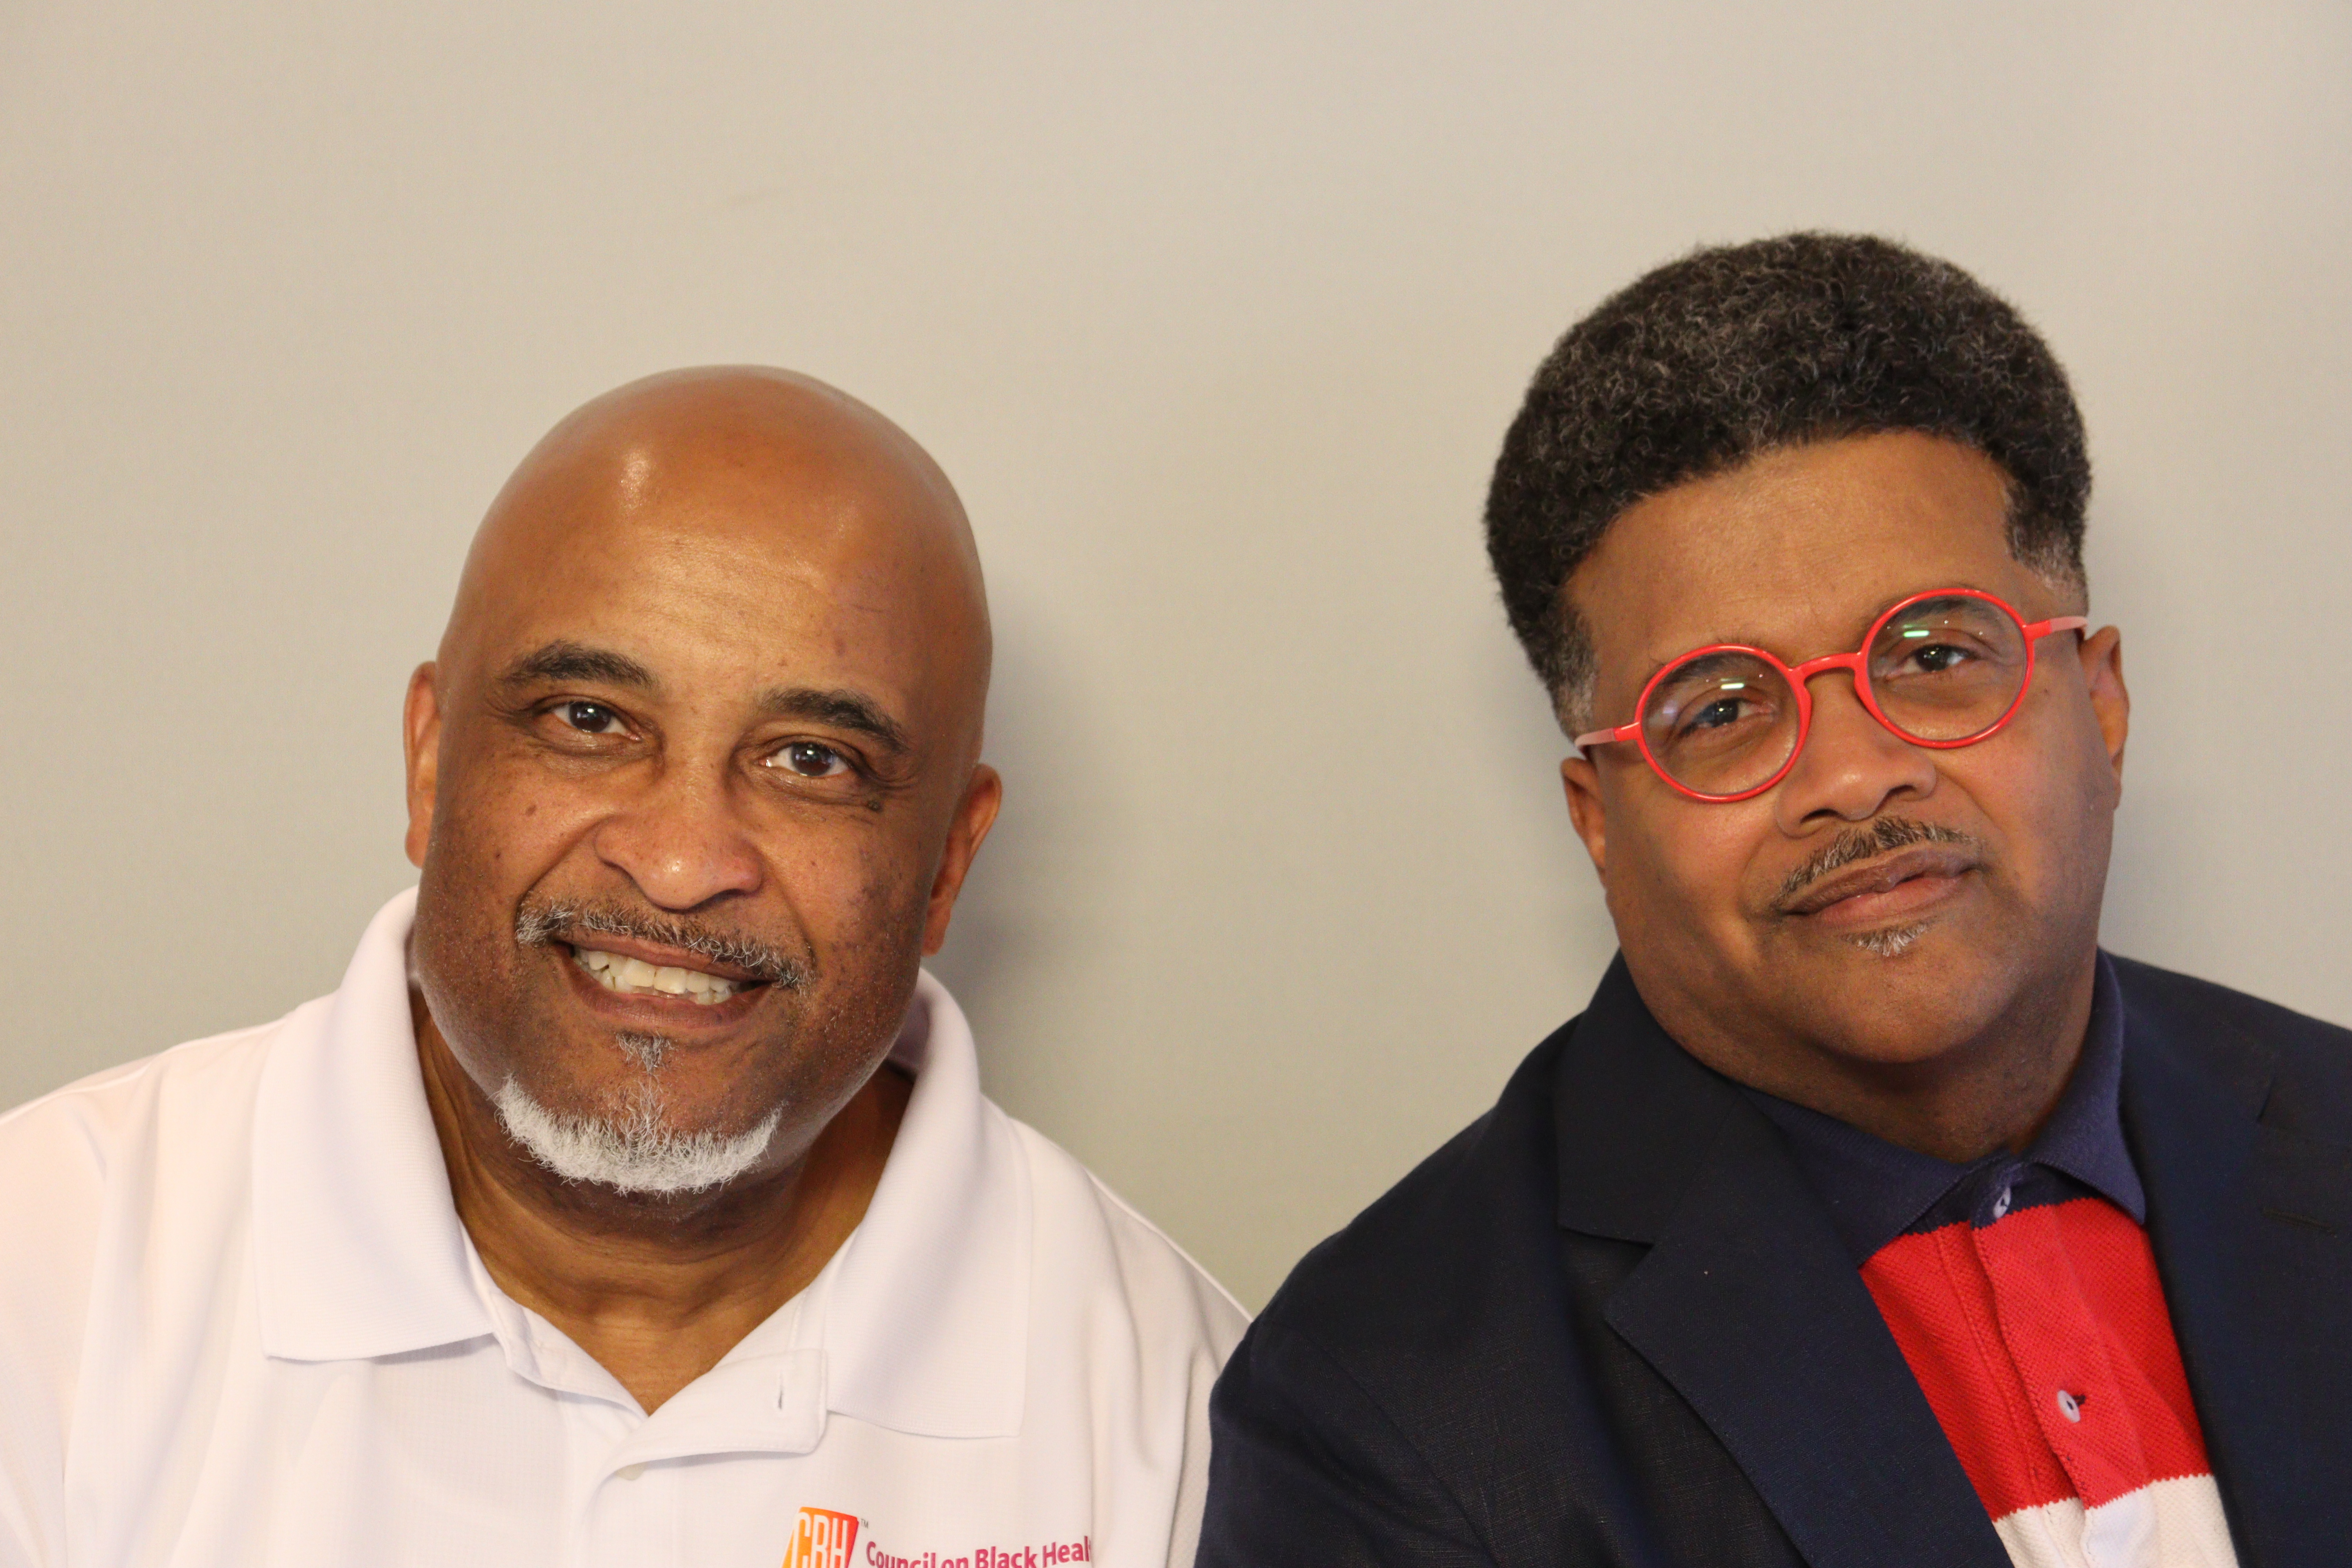 Arthur "AJ" Johns, left, and Bishop Wade Ferguson shared a conversation in the StoryCorps mobile recording booth in uptown Charlotte.